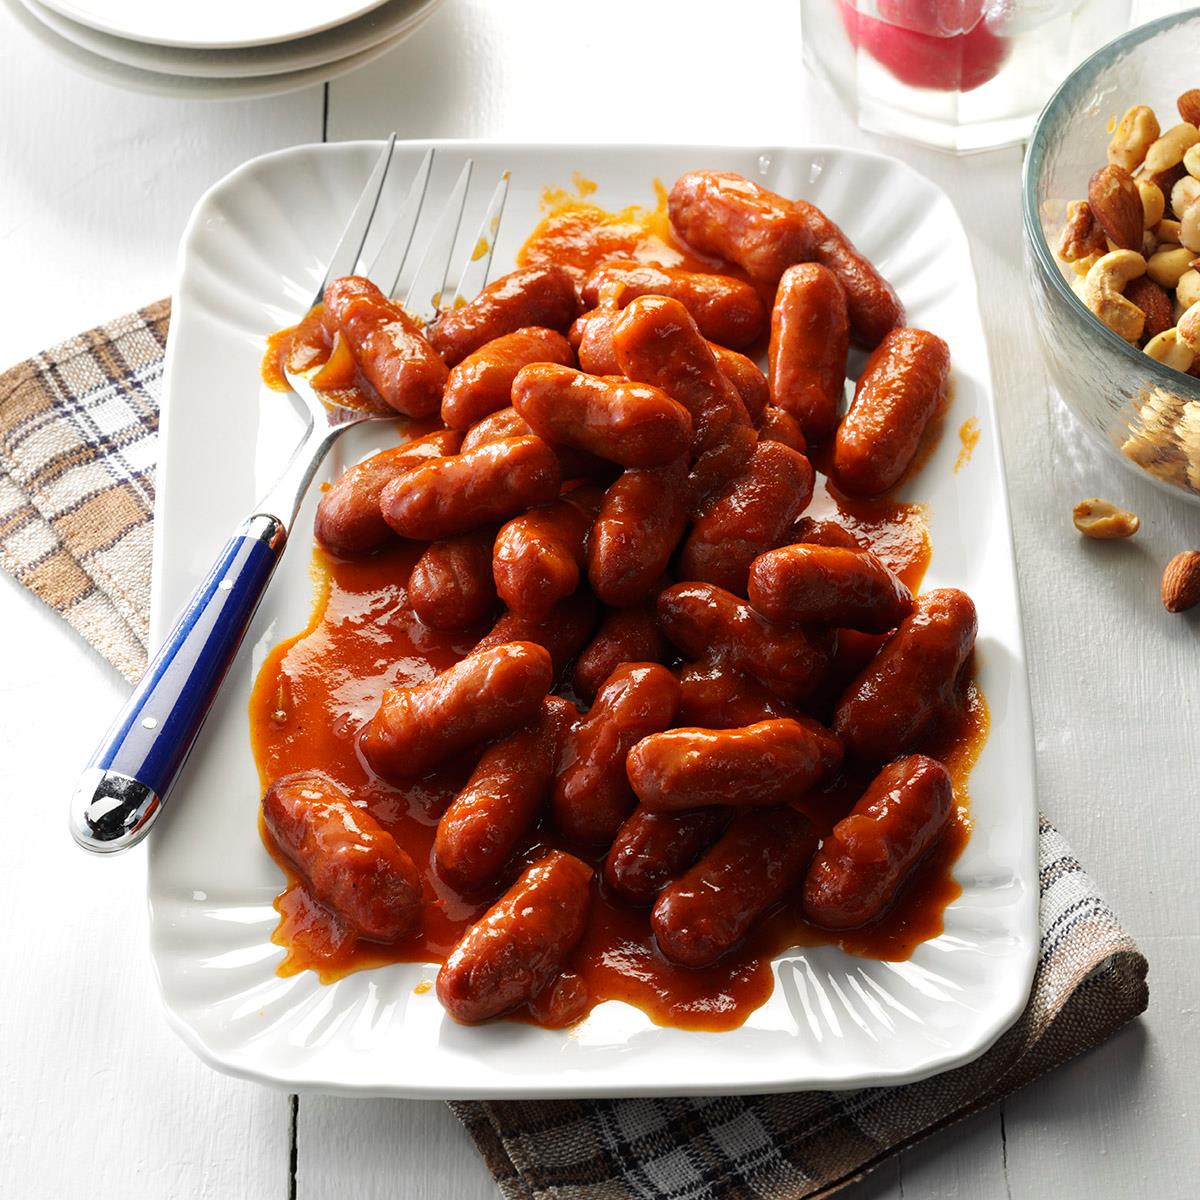 These tiny, tangy appetizers have such broad appeal. I prepare them often for holiday gatherings, weddings and family reunions. They're convenient to serve at parties since the sauce can be made ahead, then just reheated with the franks before serving. —Lucille Howell, Portland, Oregon <a href="https://www.tasteofhome.com/recipes/party-franks/">Get Recipe</a>